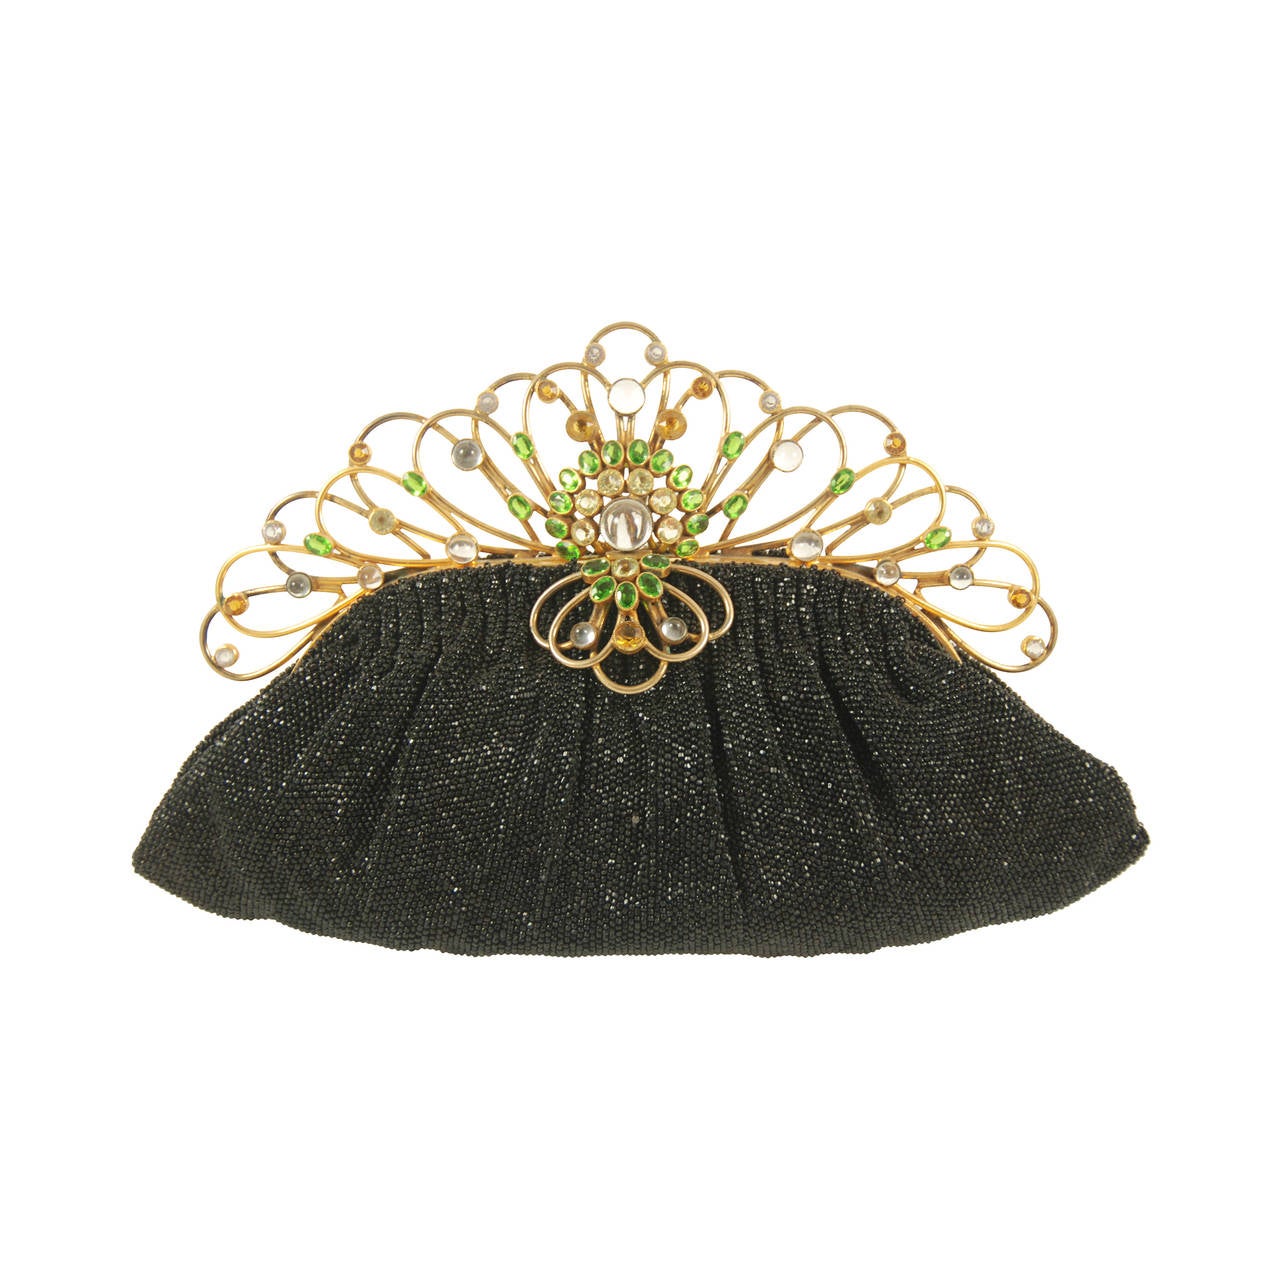 1950s Josef Black Beaded Evening Bag with Jeweled Hobe Style Frame For Sale